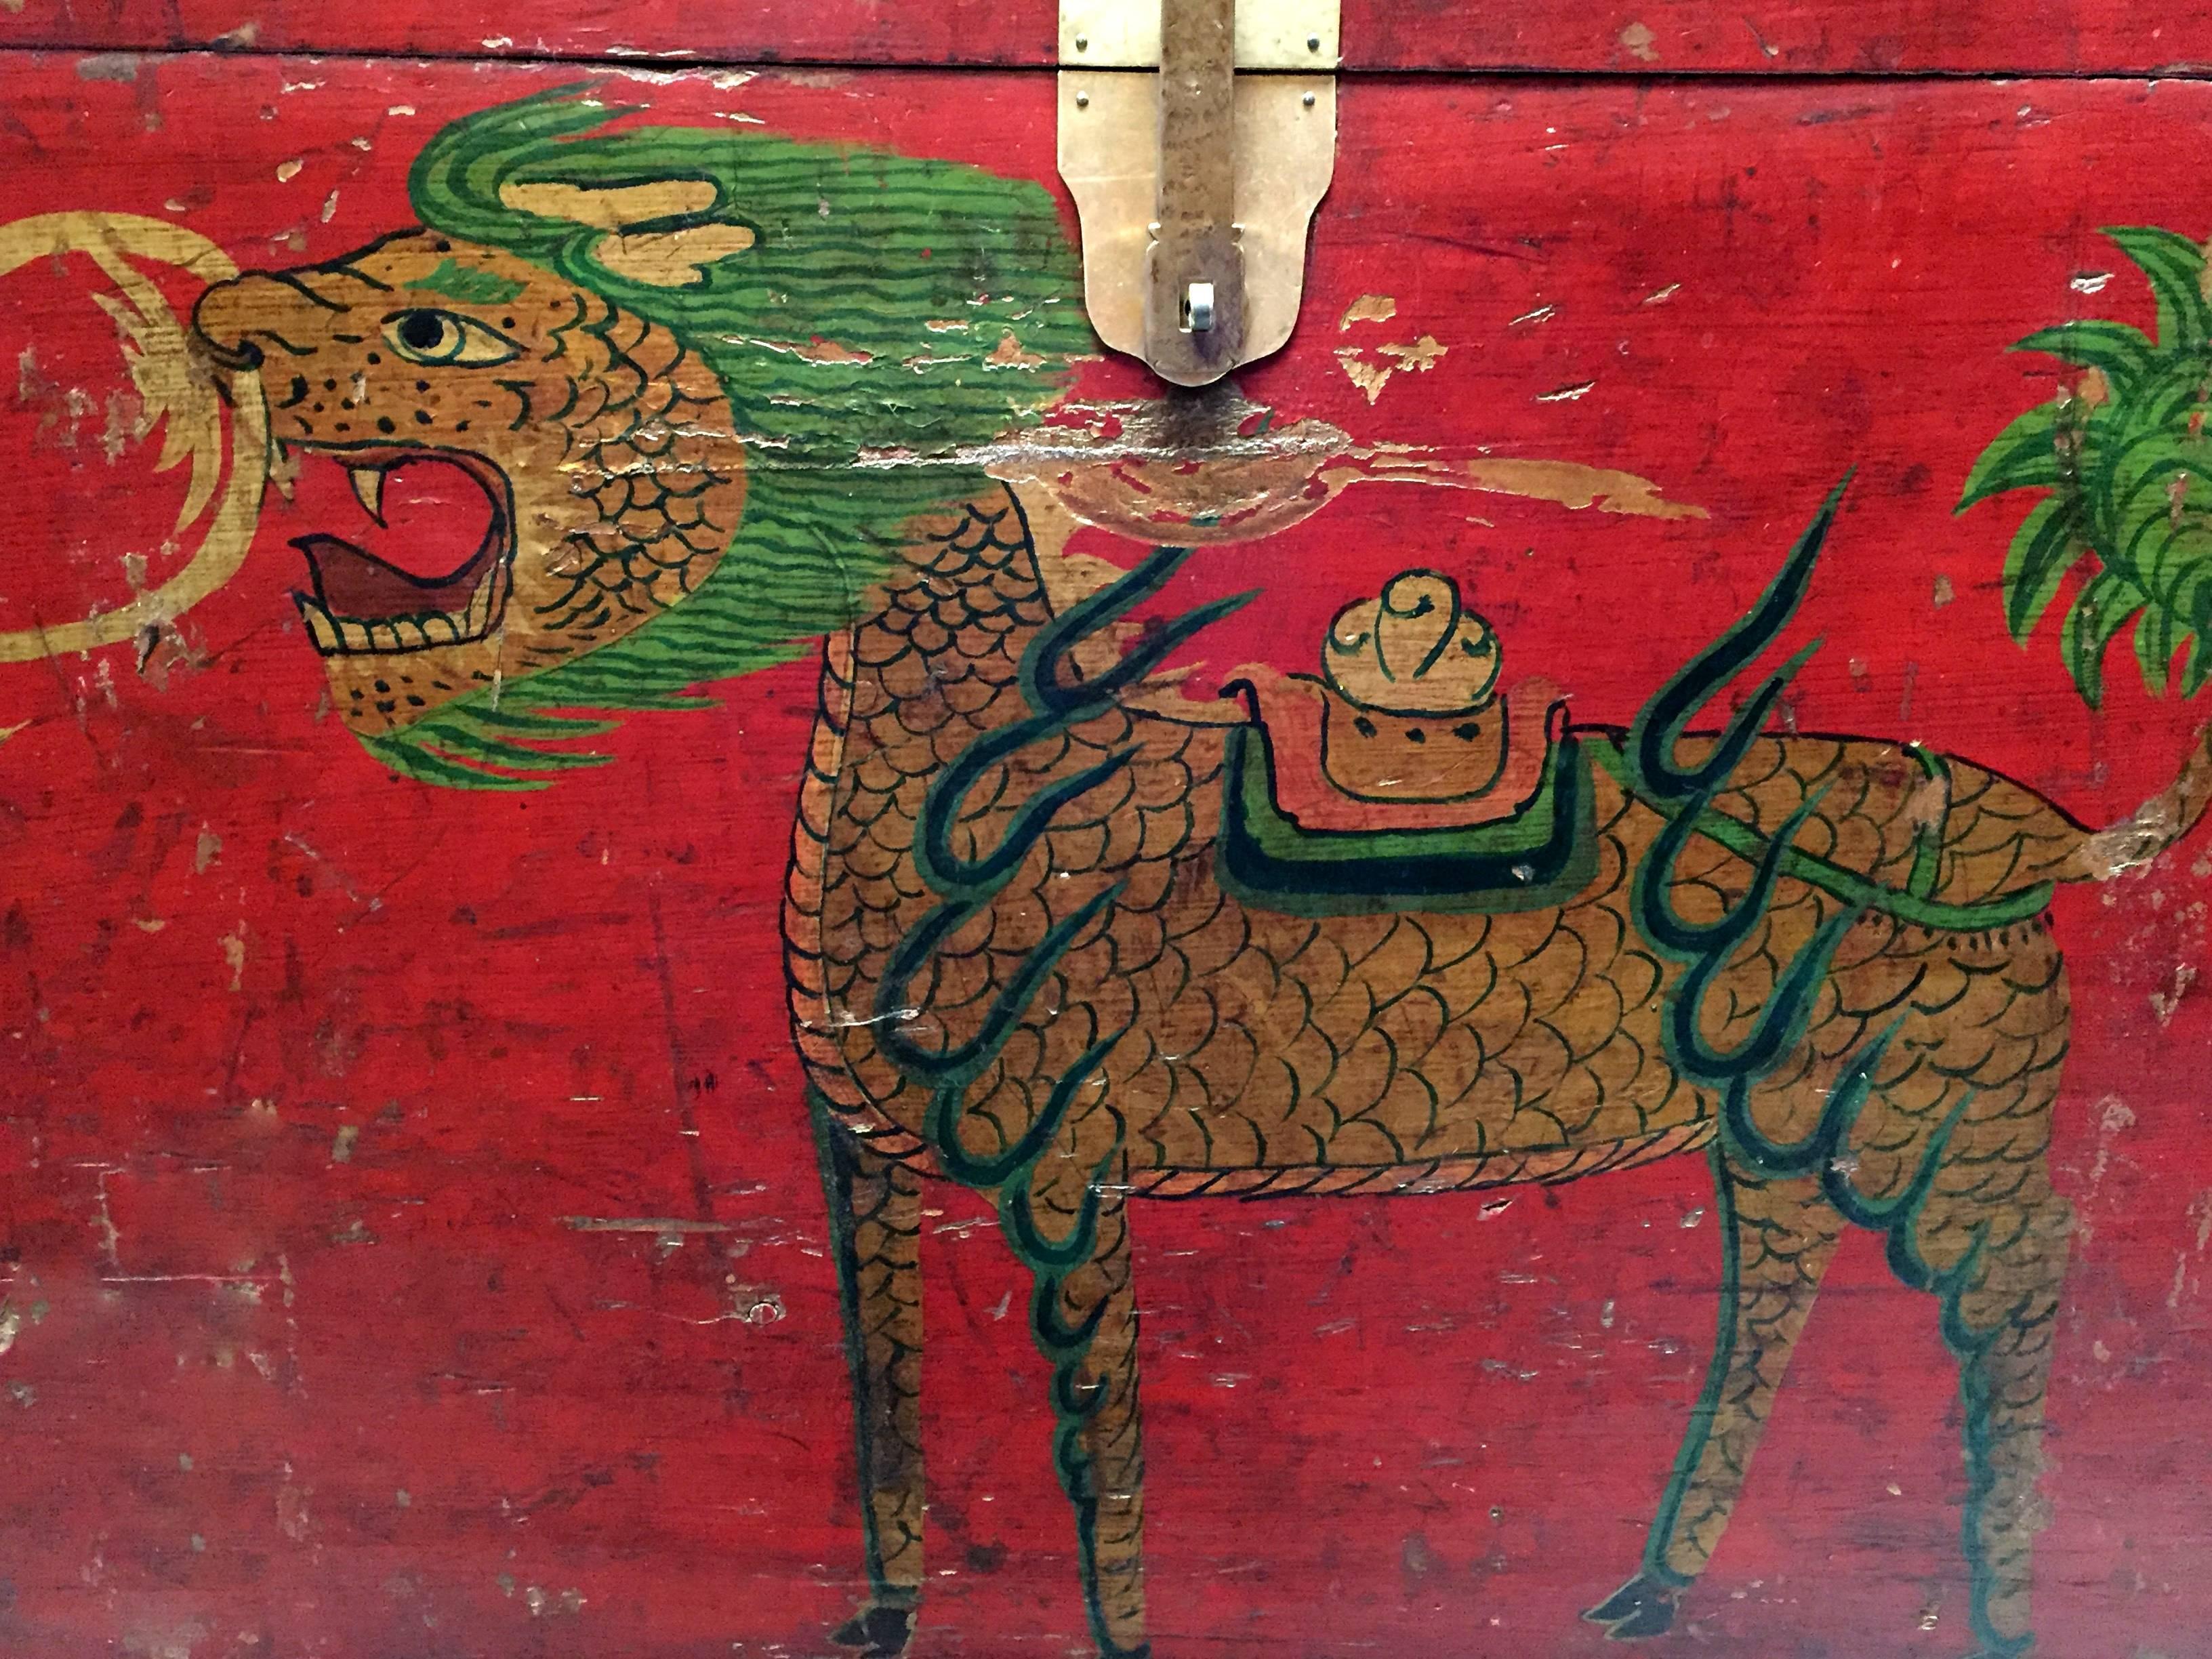 The fantastic Tibetan trunk features a single Qi Lin, the mythical animal that was believed to bring good fortune, children and prosperity. Completely hand-painted with the most charming, tribal, folk artsy approach, this trunk employs splendid